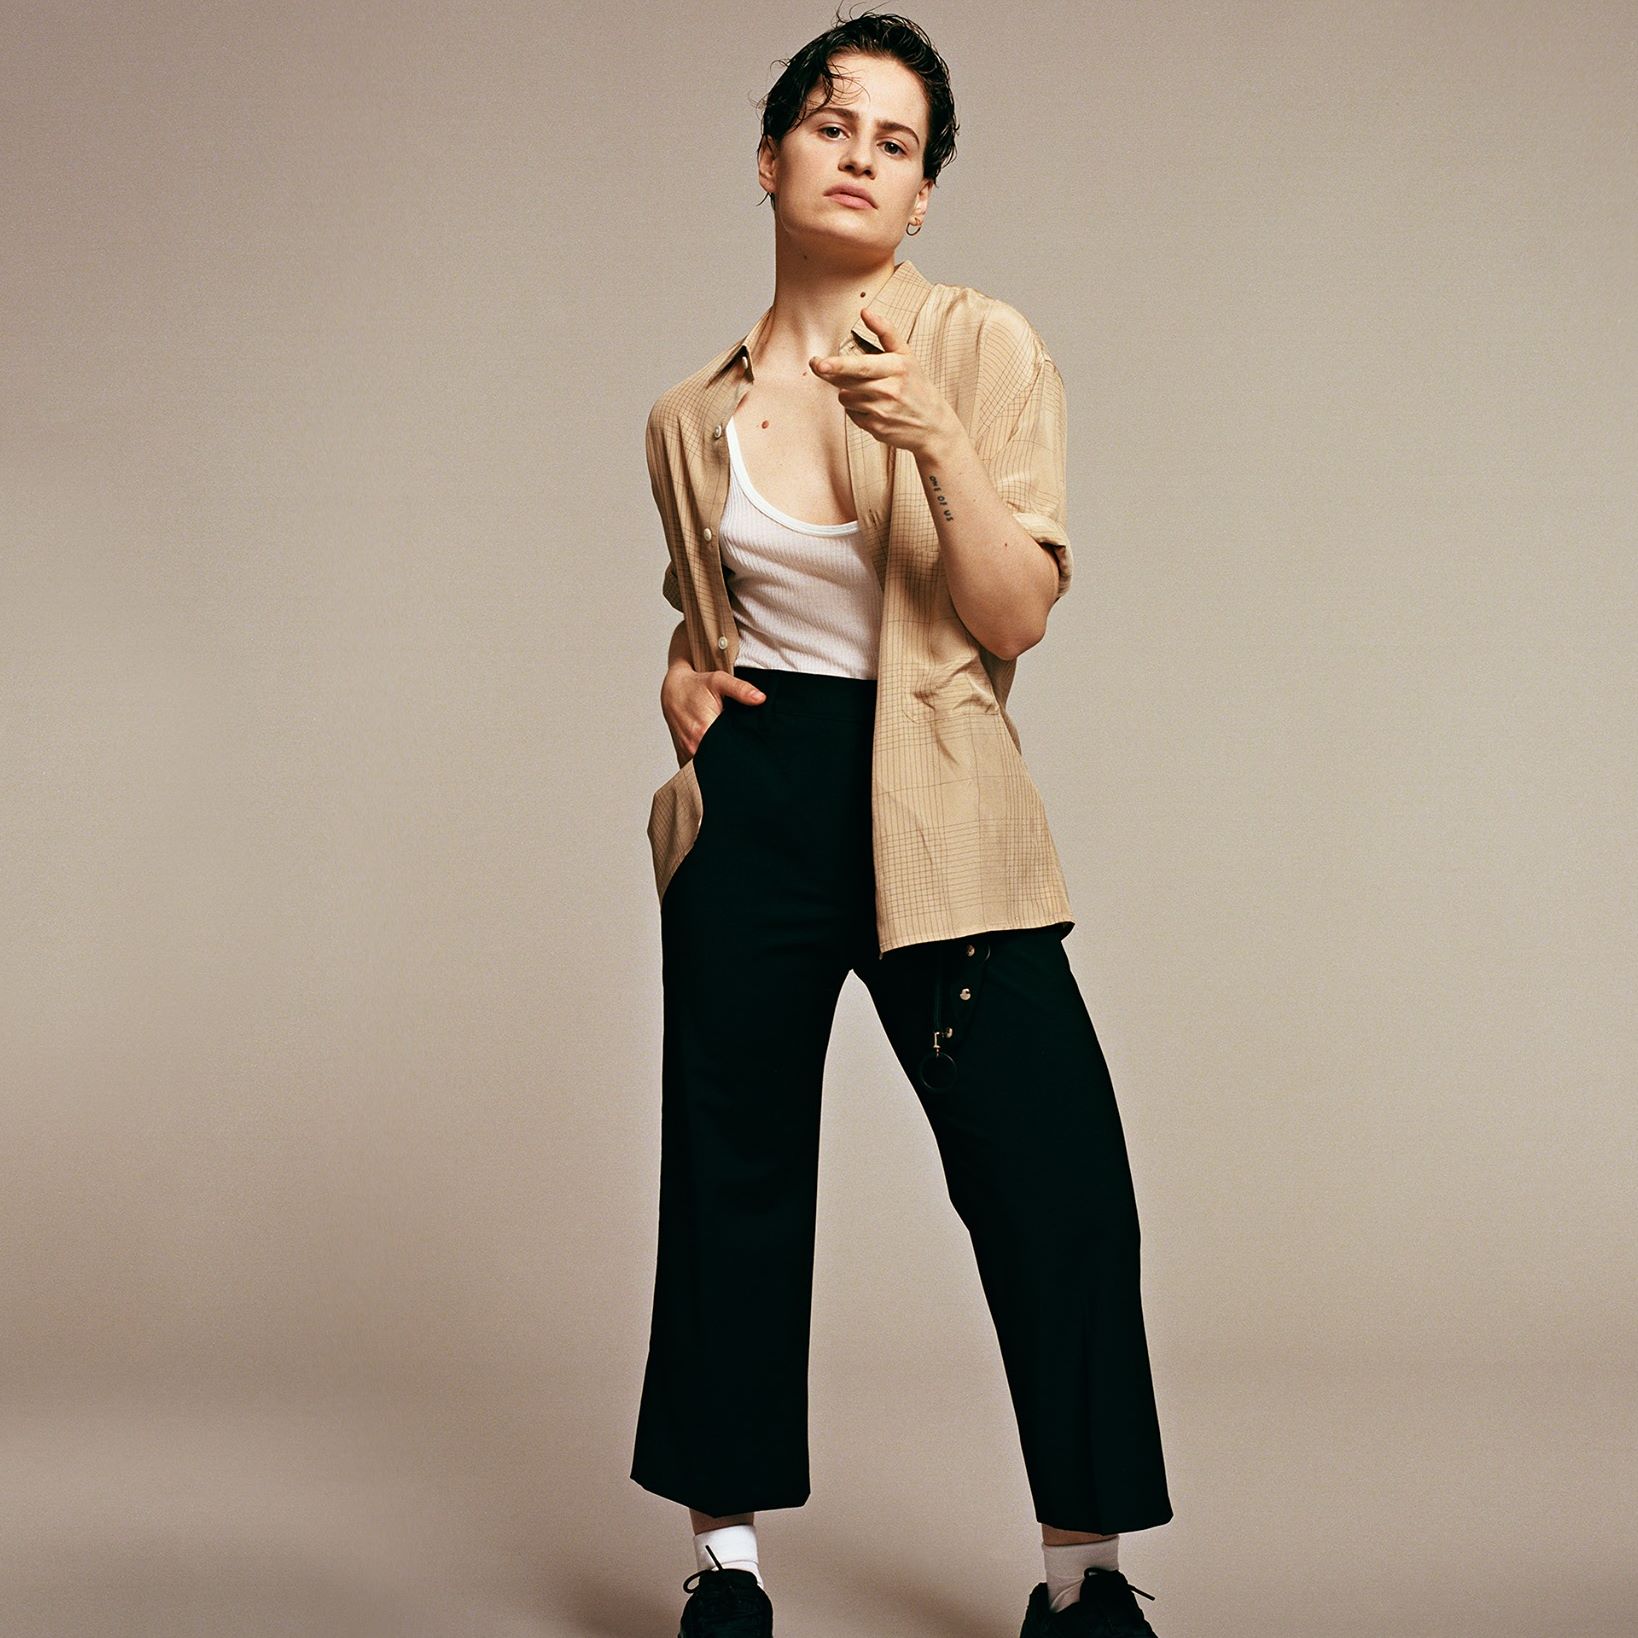 Billets Christine and the Queens